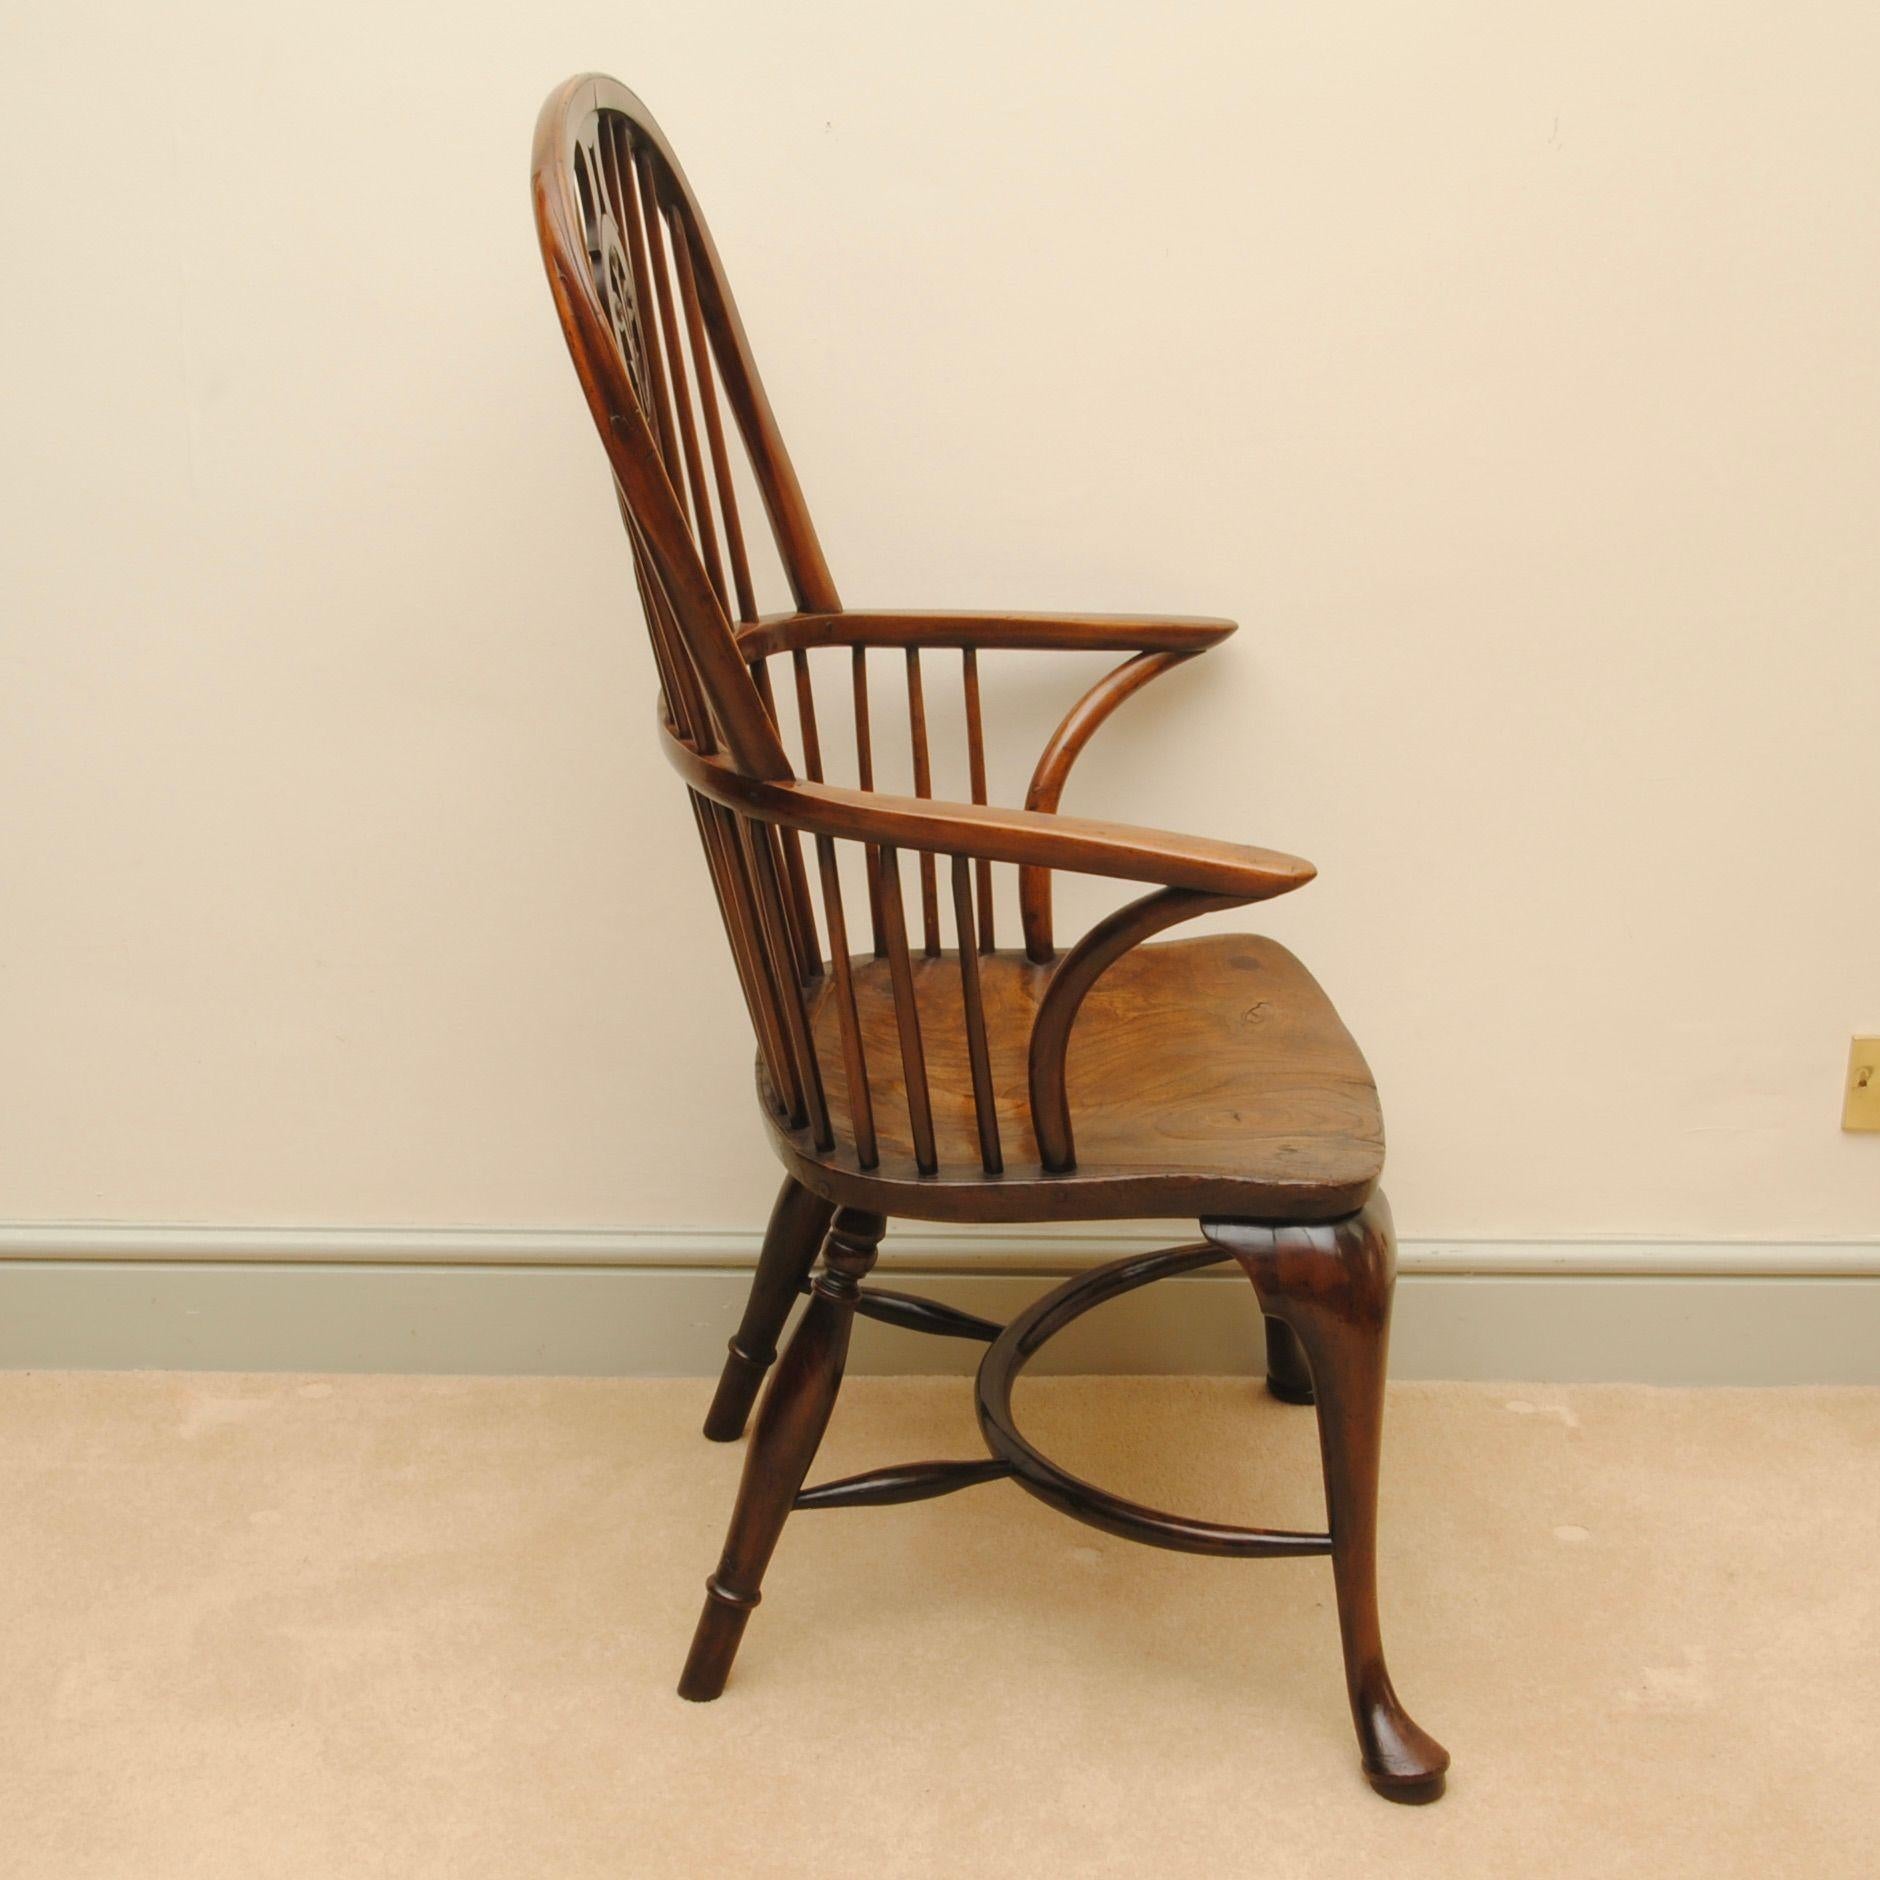 English 18th Century Thames Valley Yew Wood Windsor Armchair For Sale